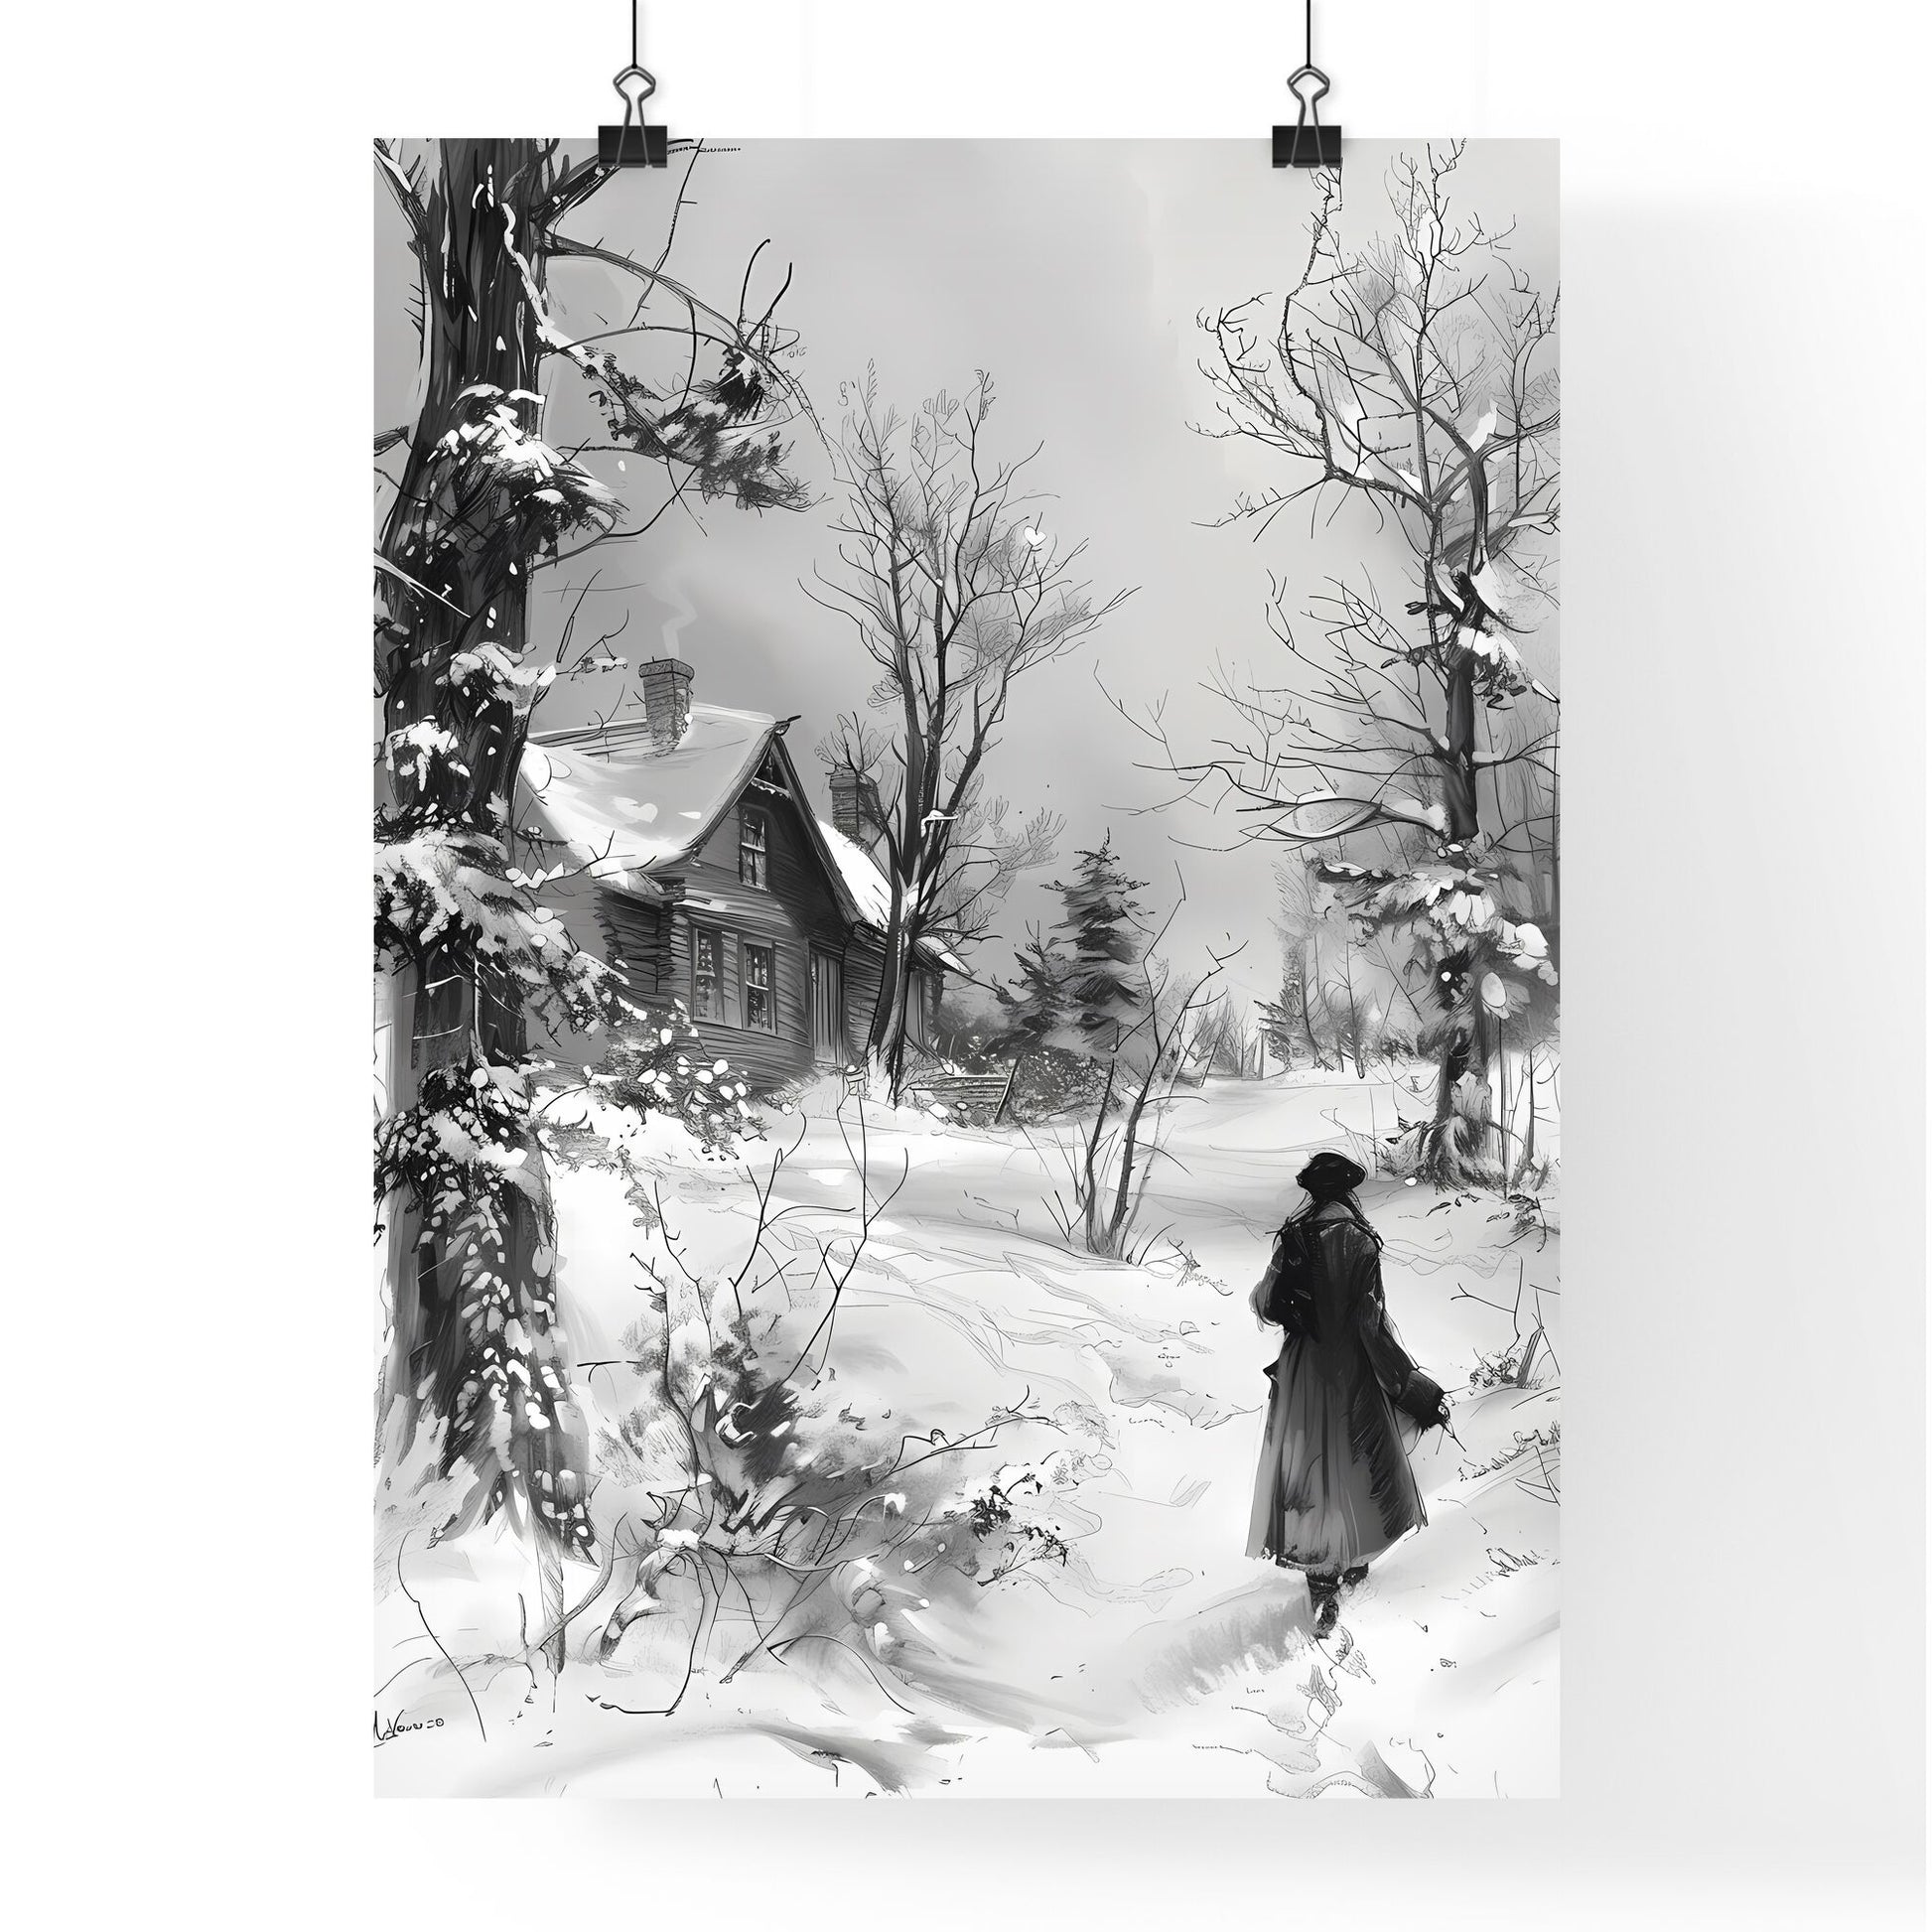 Vibrant Winter Landscape Painting: Snowy Scene with Old House, Person Walking, Trees Default Title